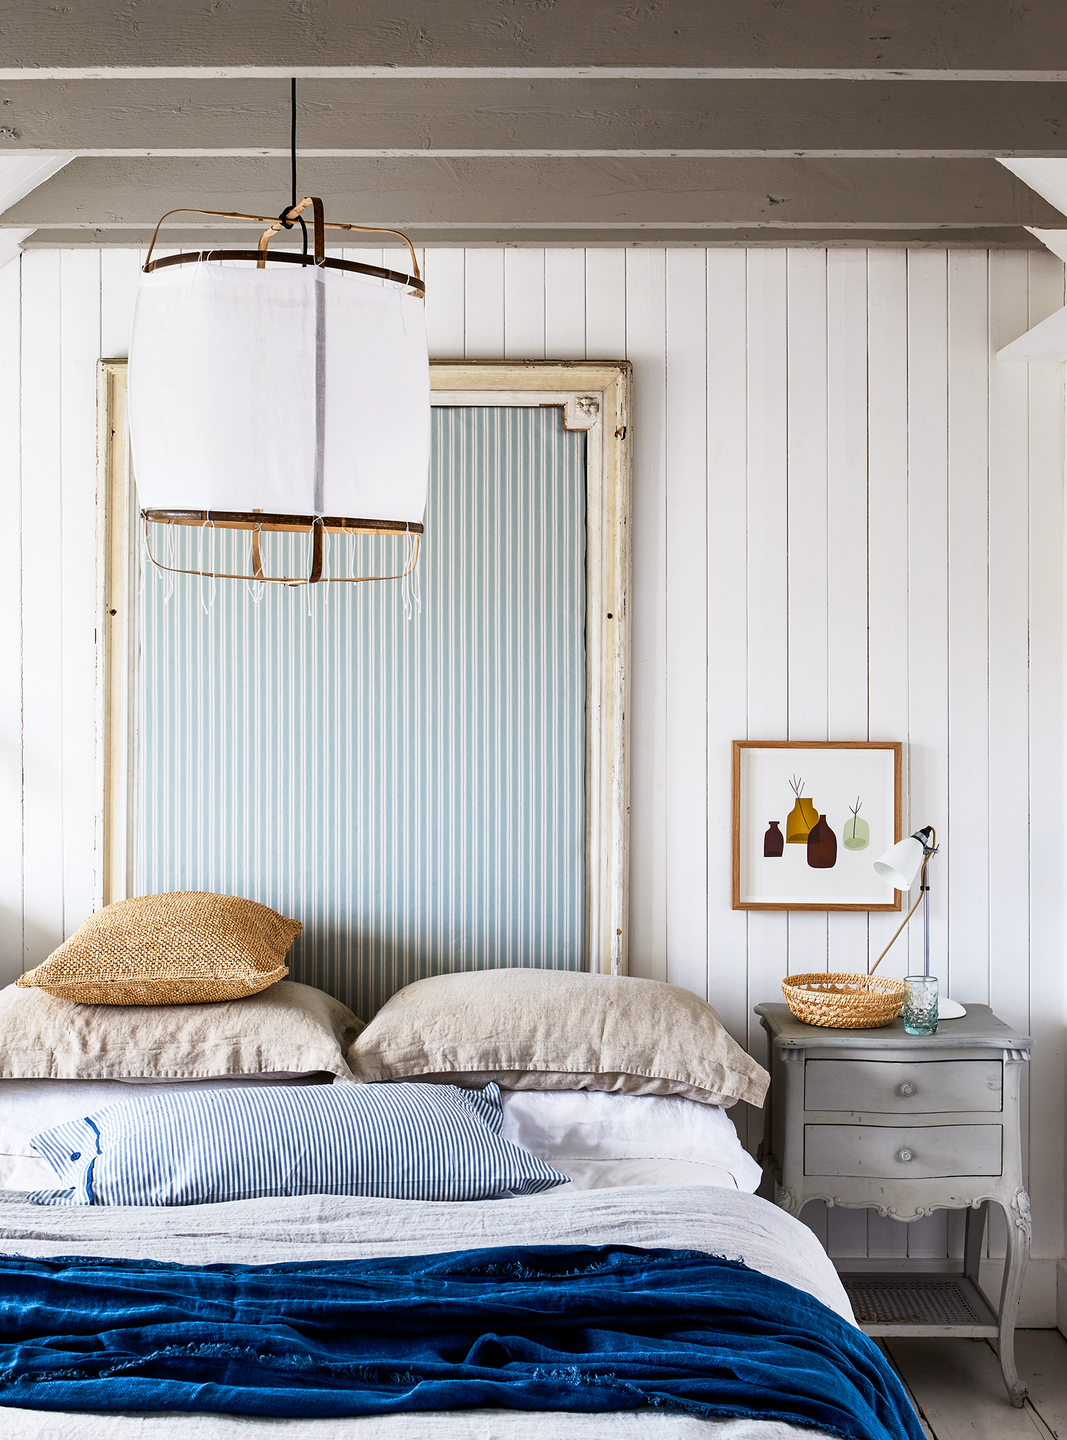 coastal inspired bedroom with diy headboard crafted from an antique mirror frame and striped upholstery maritime feel, nautical